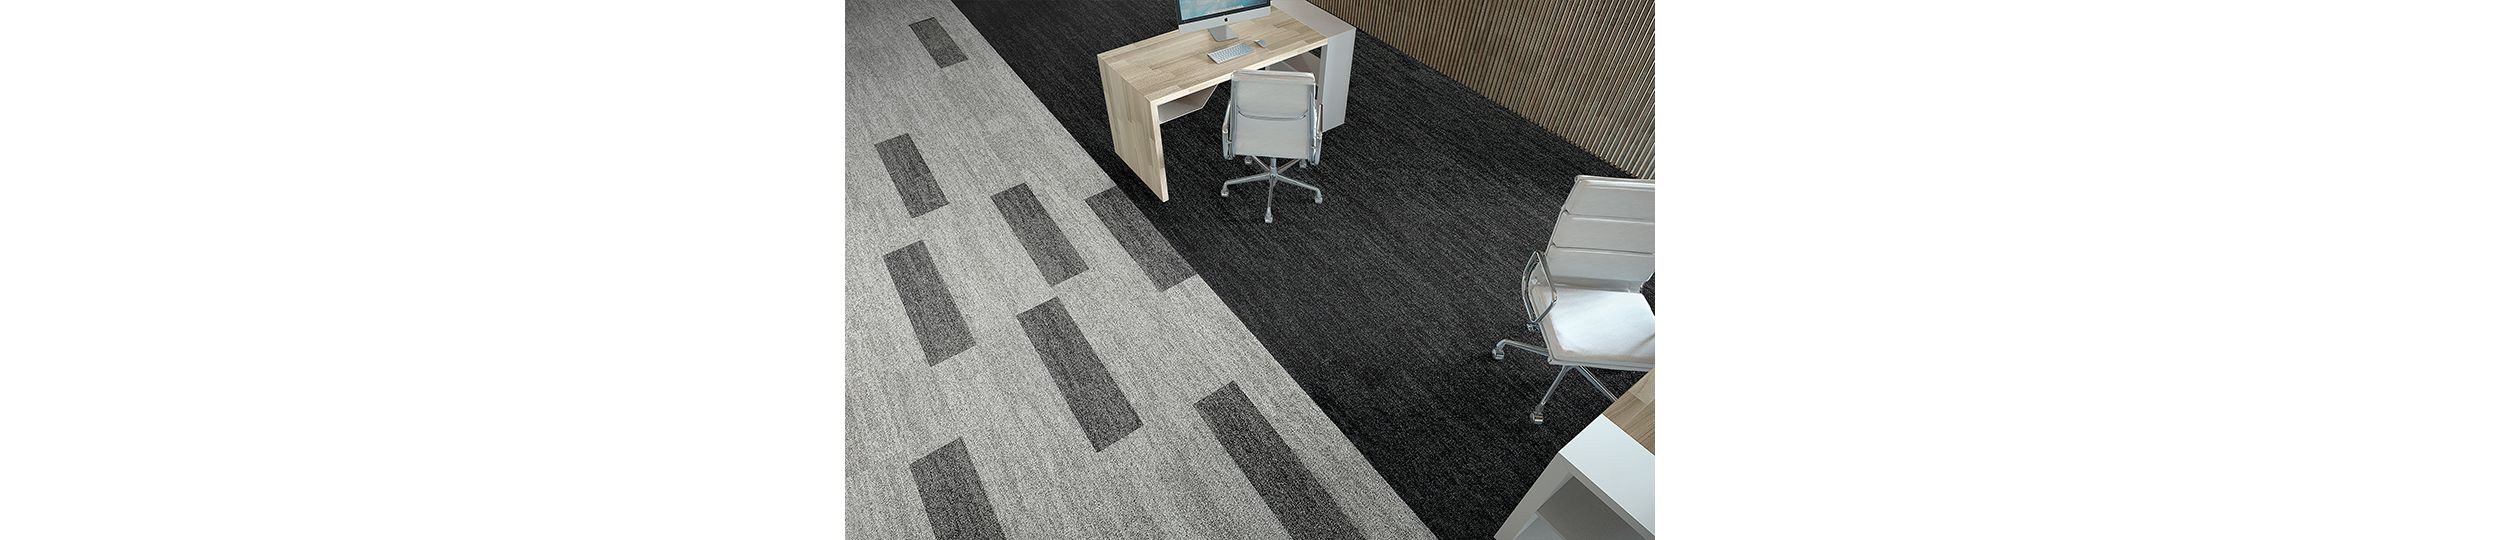 Interface Open Air 402 plank carpet tile in overhead view with small work desk and wood slat wall numéro d’image 5